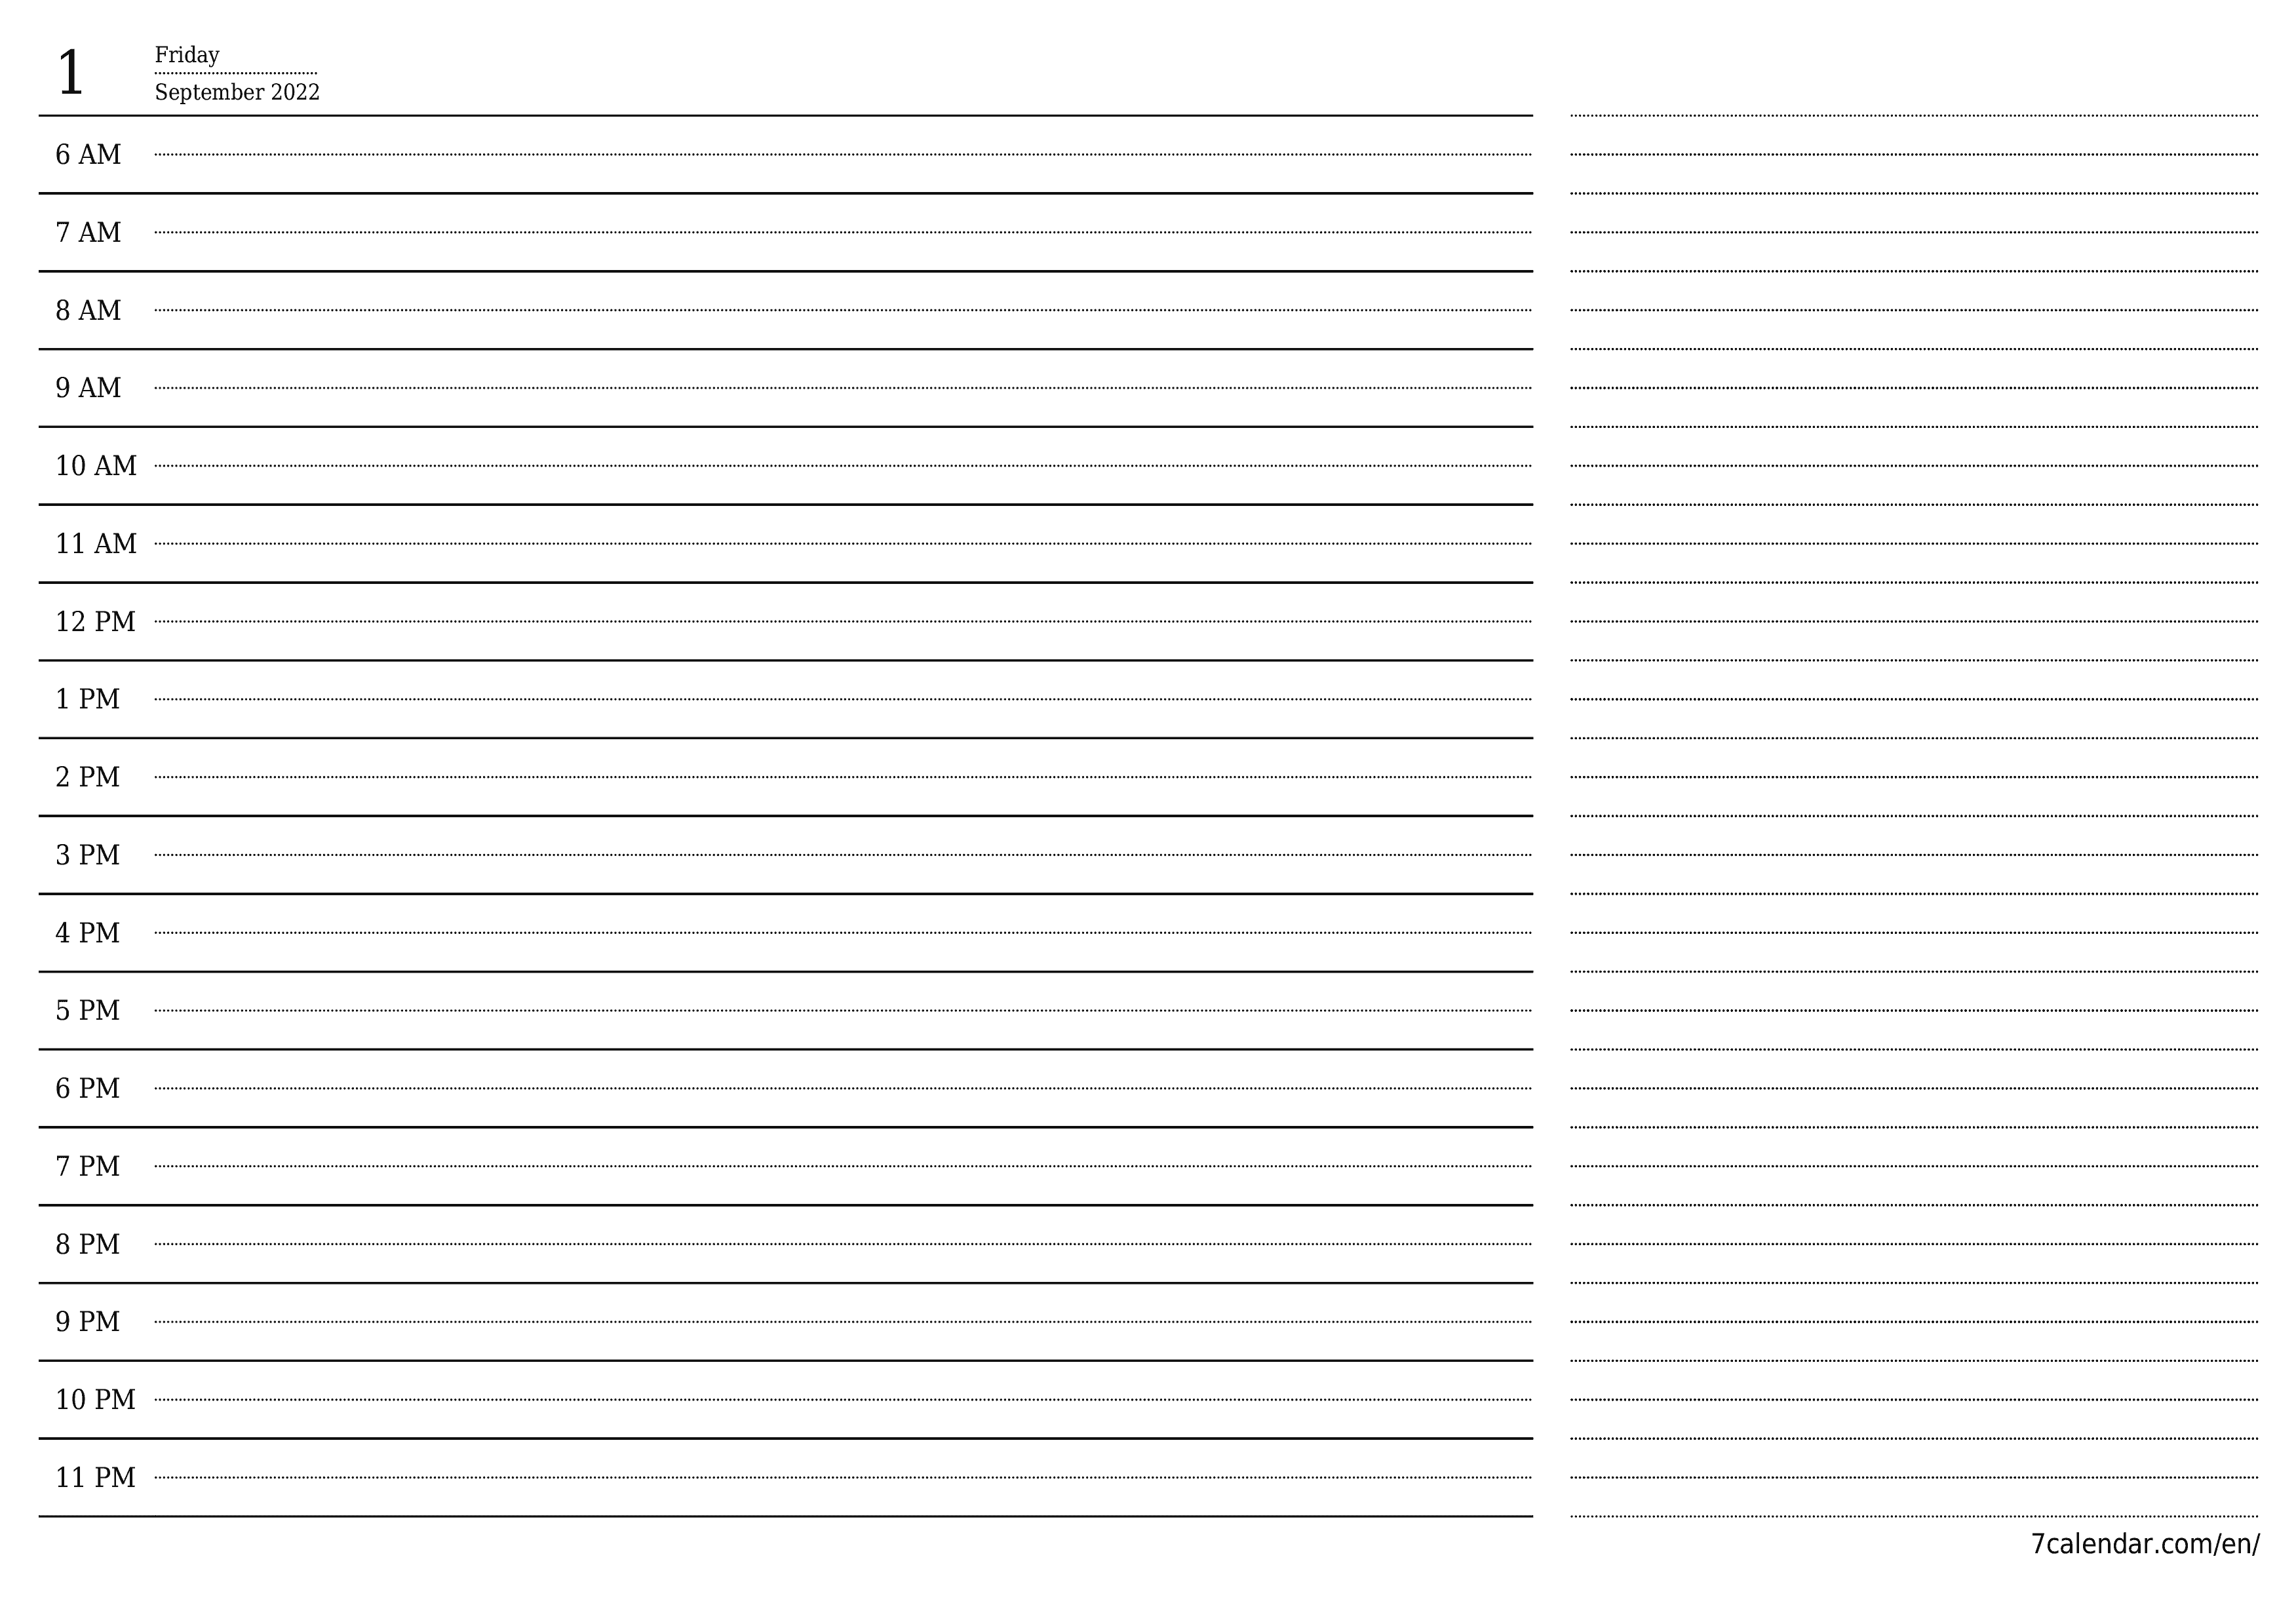 Blank daily printable calendar and planner for day September 2022 with notes, save and print to PDF PNG English - 7calendar.com